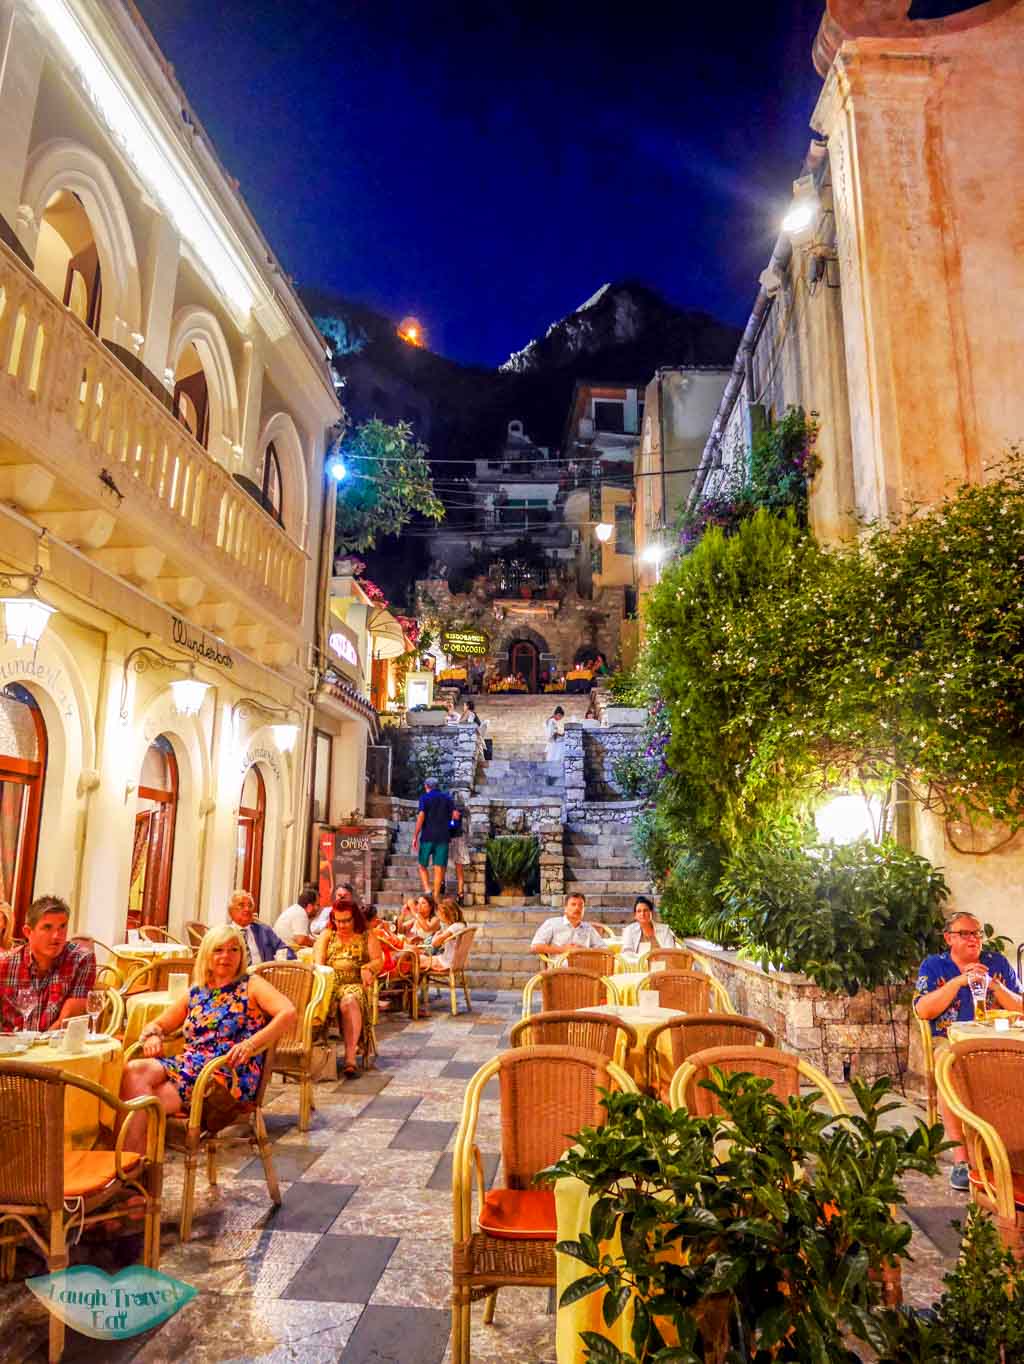 One of the many side streets in Taormina, ever so lively with restaurant tables filling up 2/3 of the street | Laugh Travel Eat